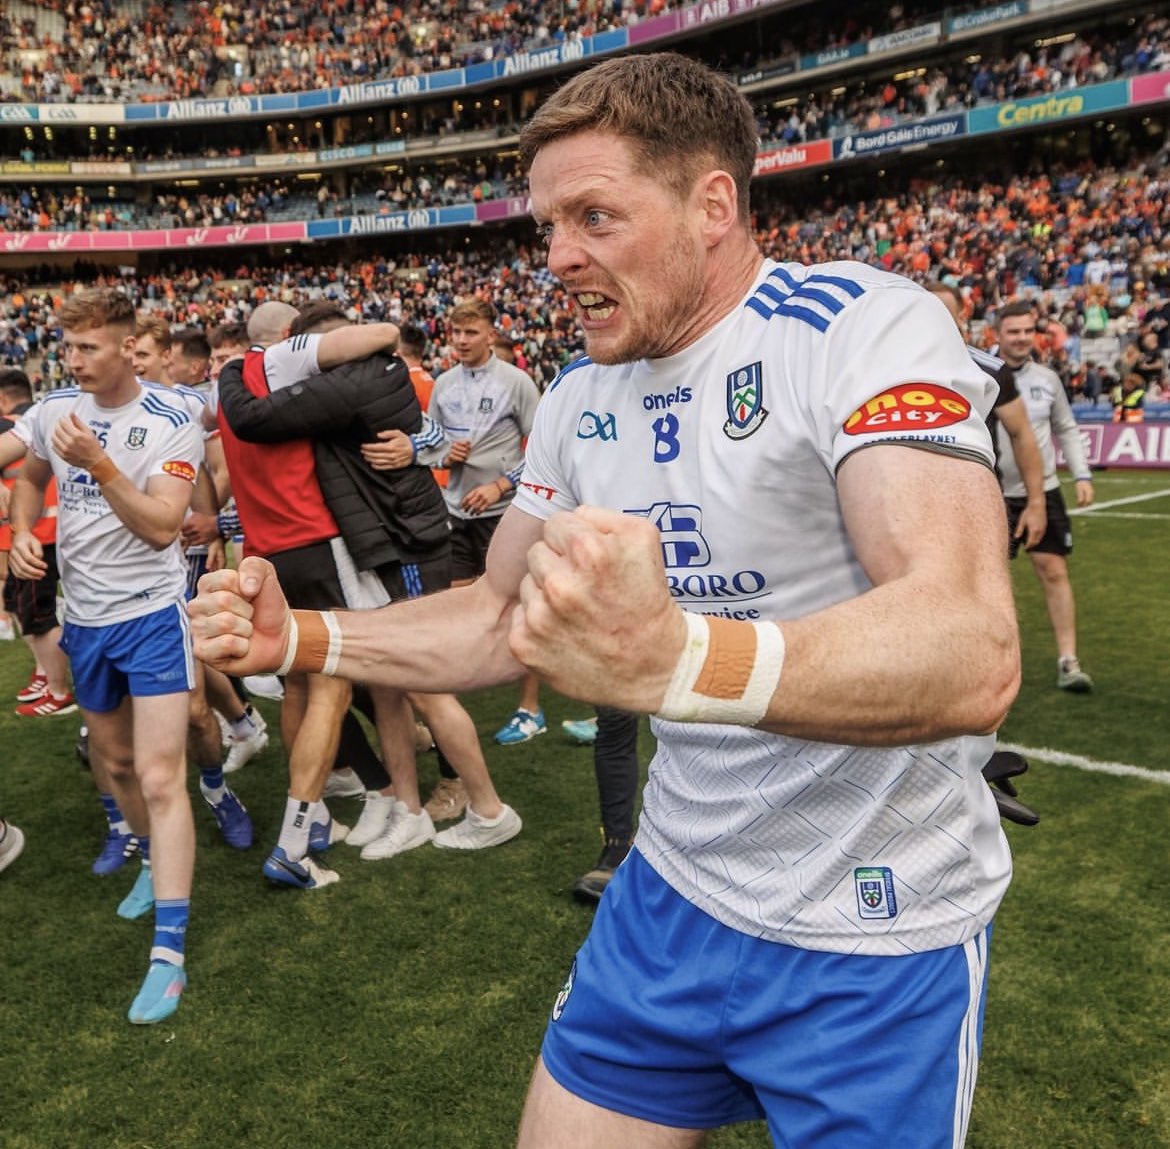 WHAT A FU**ING TEAM MONAGHAN ARE!!! Written of by the entire country game after game and yet here they are marching on to the All Ireland Semi Finals. They have beaten Armagh 9-8 after Extra Time and penalties in Croke Park. The Farney Army march on🔵⚪️ @monaghangaa